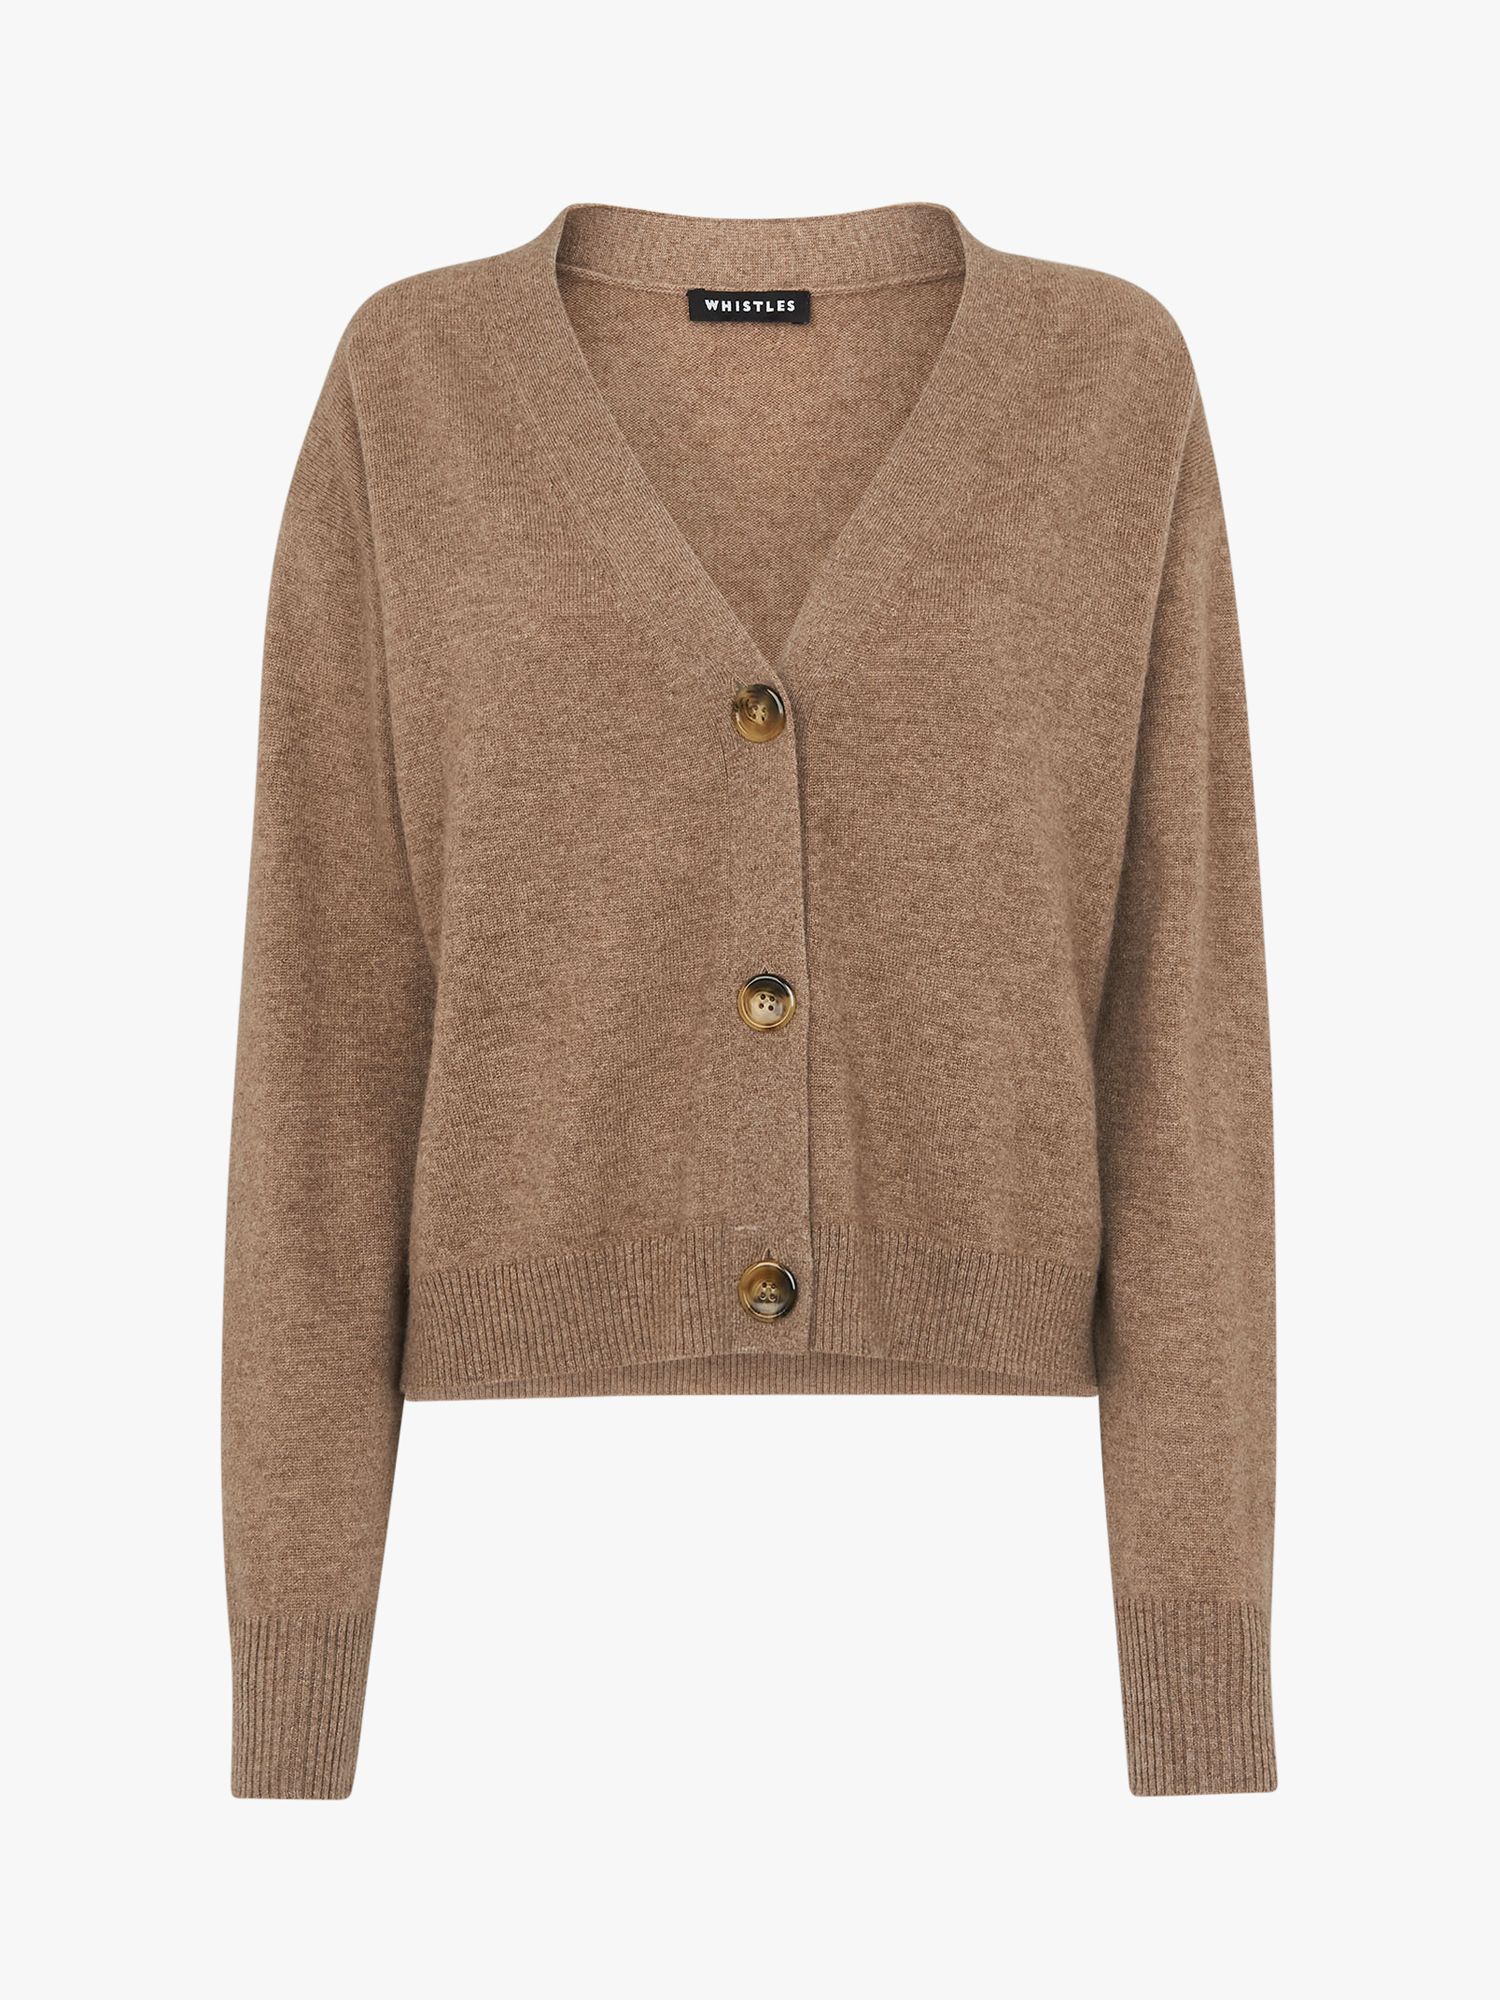 Whistles Cashmere Cardigan, Oatmeal at John Lewis & Partners